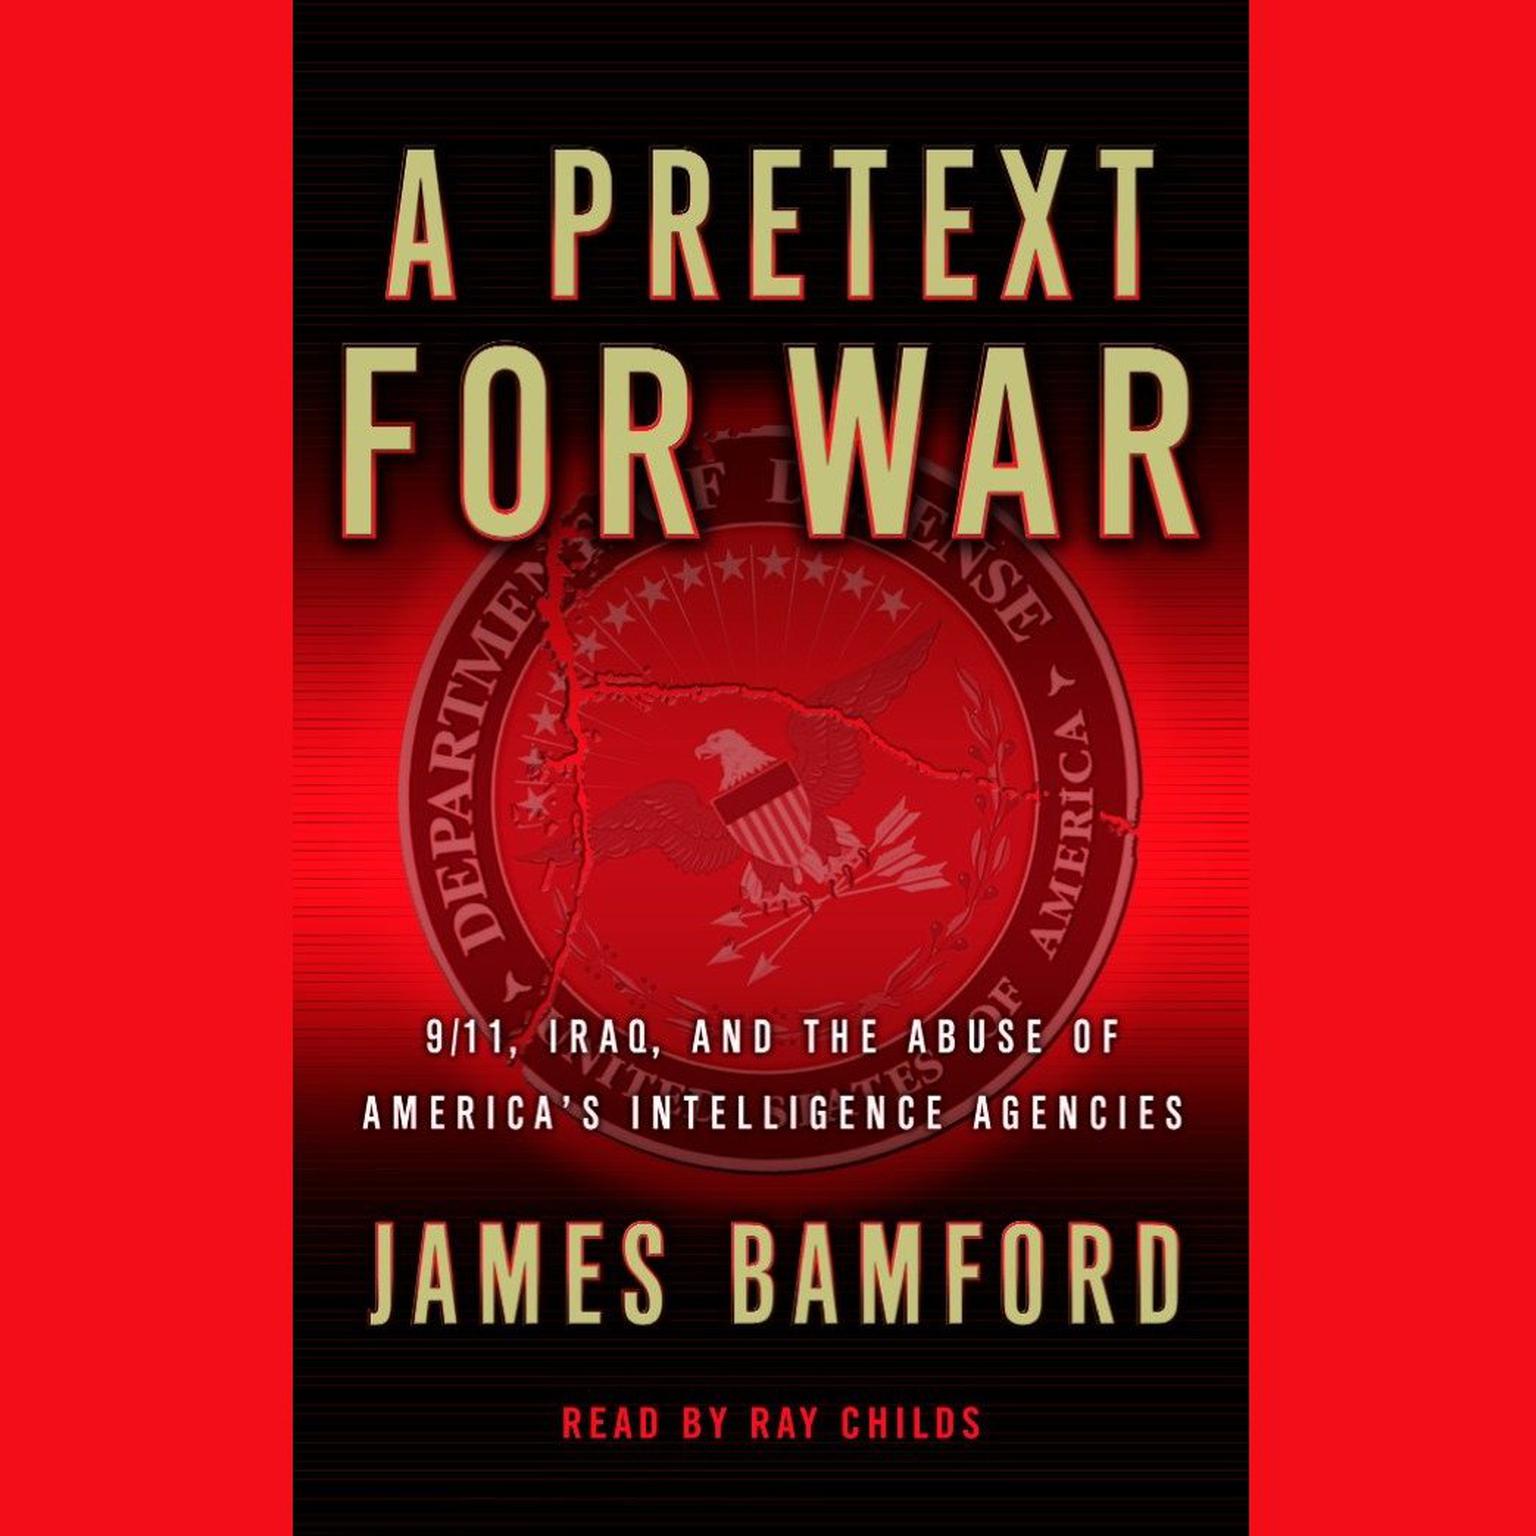 A Pretext for War (Abridged): 9/11, Iraq, and the Abuse of Americas Intelligence Agencies Audiobook, by James Bamford